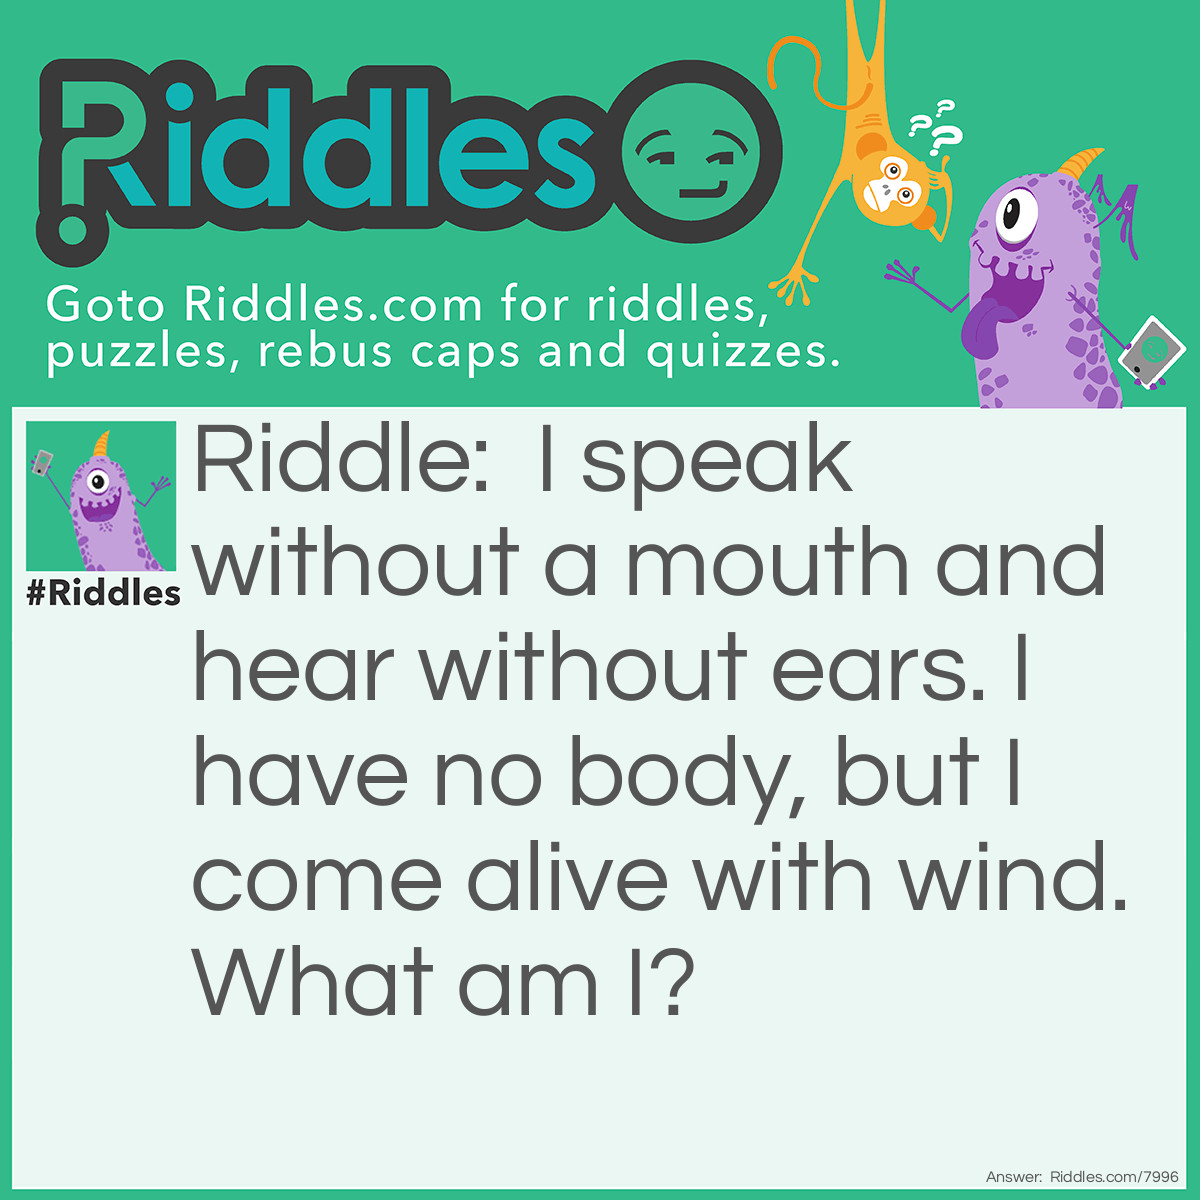 Riddle: I speak without a mouth and hear without ears. I have no body, but I come alive with wind. What am I? Answer: An echo-o-o-o.